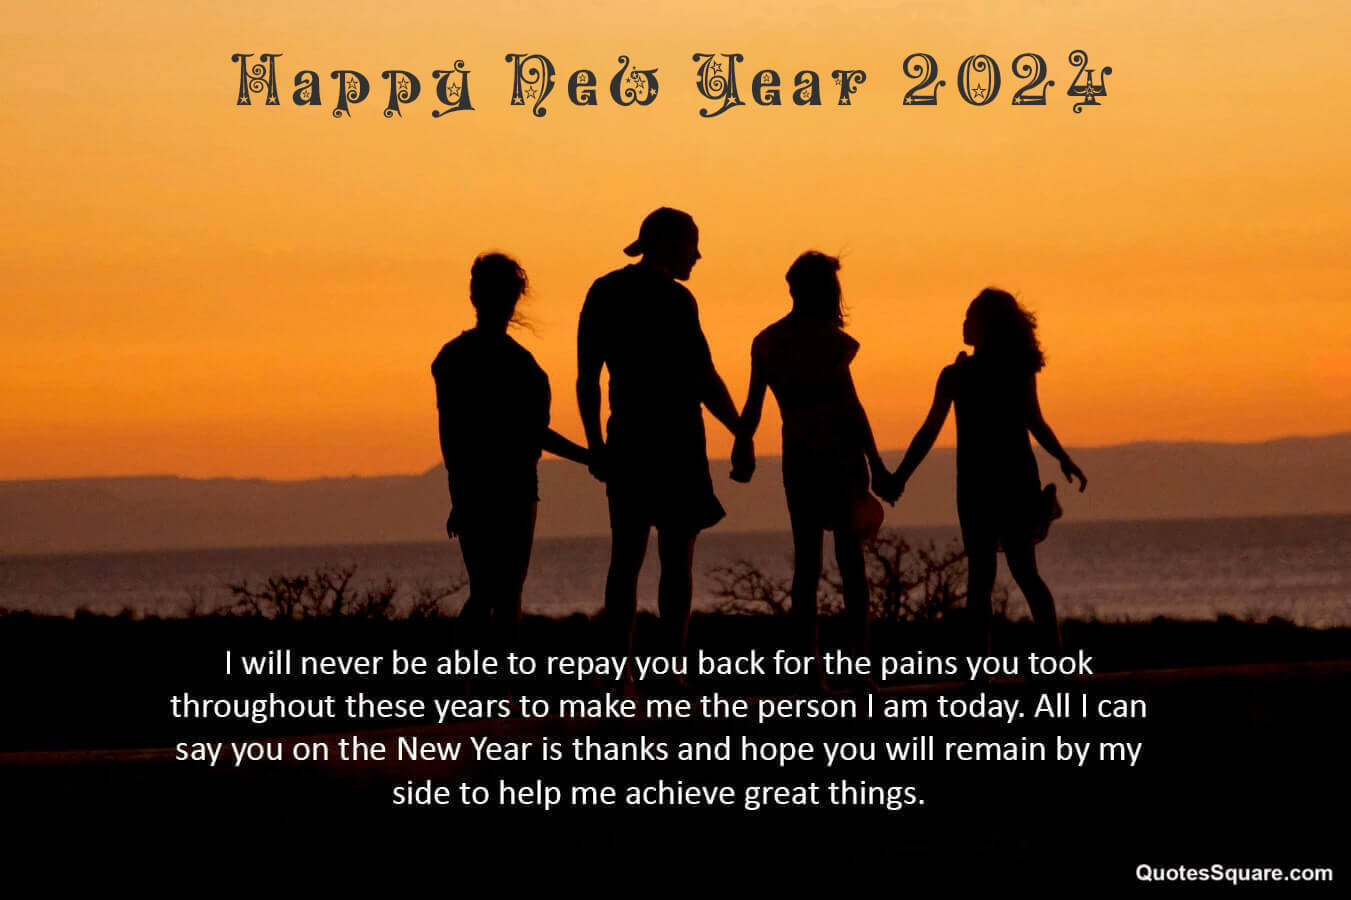 Happy New Year 2024 Quotes For Parents